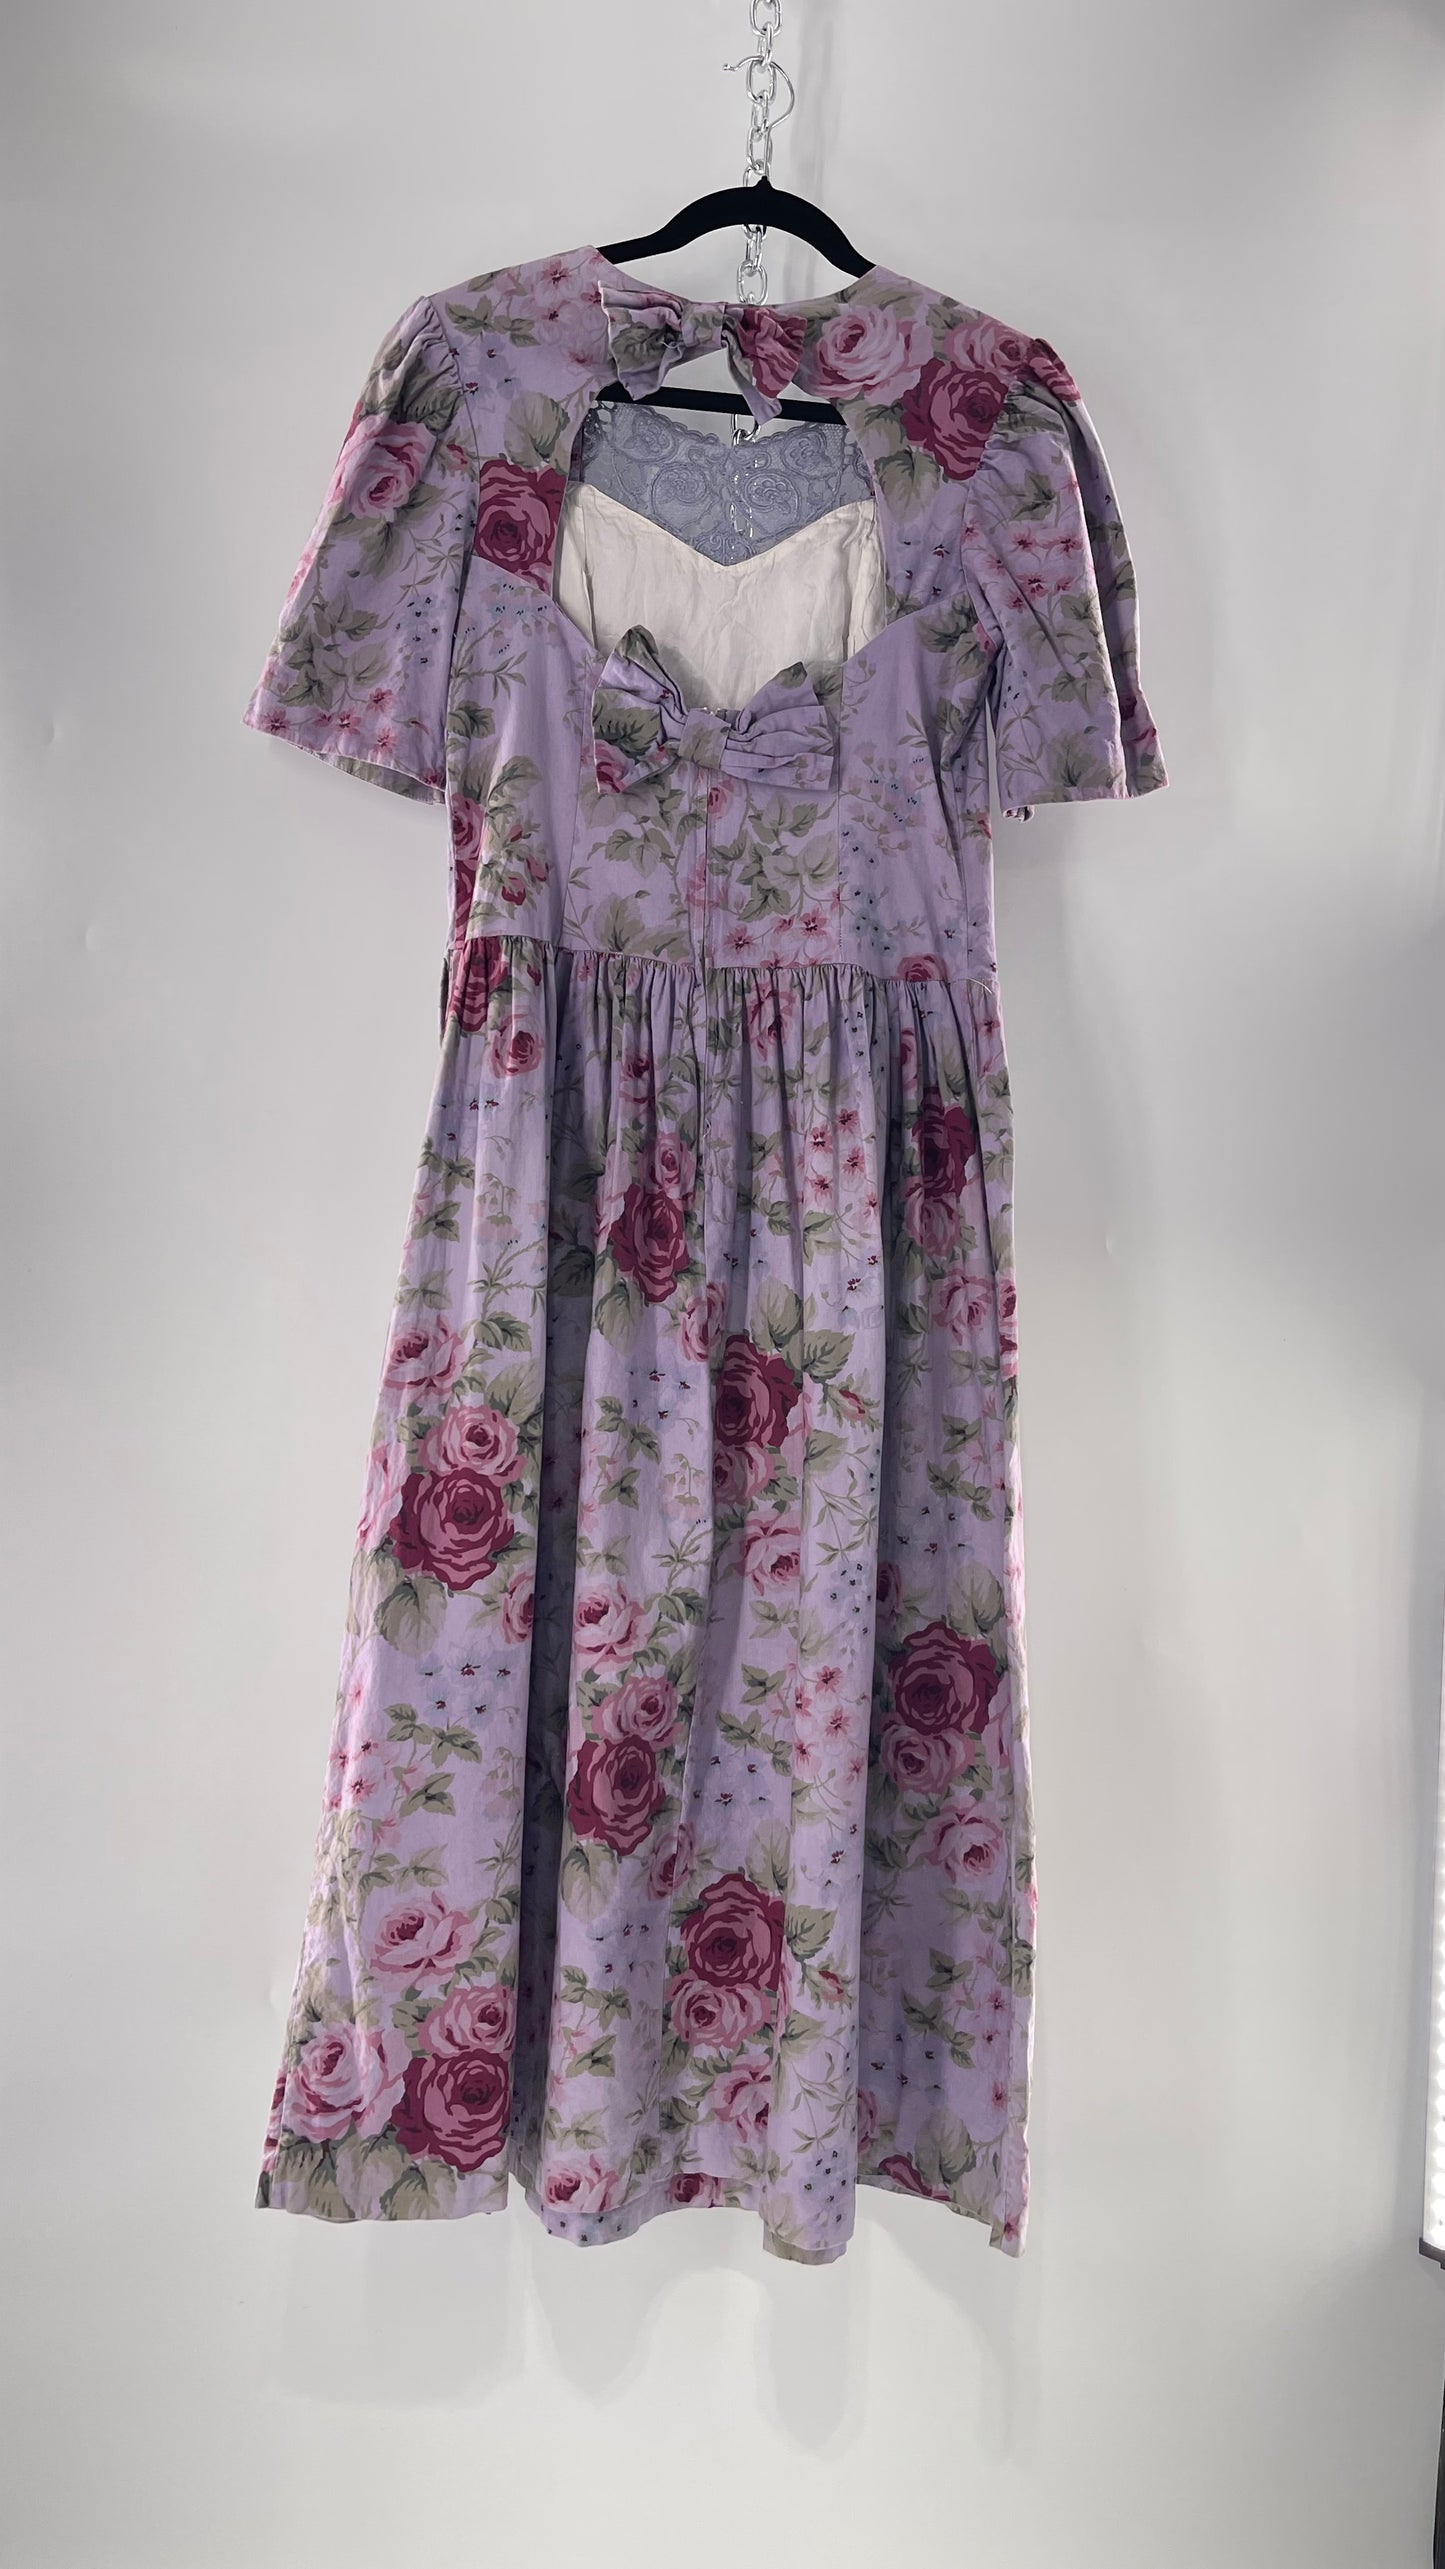 Vintage Urban Renewal Reworked and Upcycled Misty Lane Lilac/Lavender Floral Fit/Flare Dress with Sweetheart Neckline, Lace Detail and Bow Adorned Open Back  (11/12)